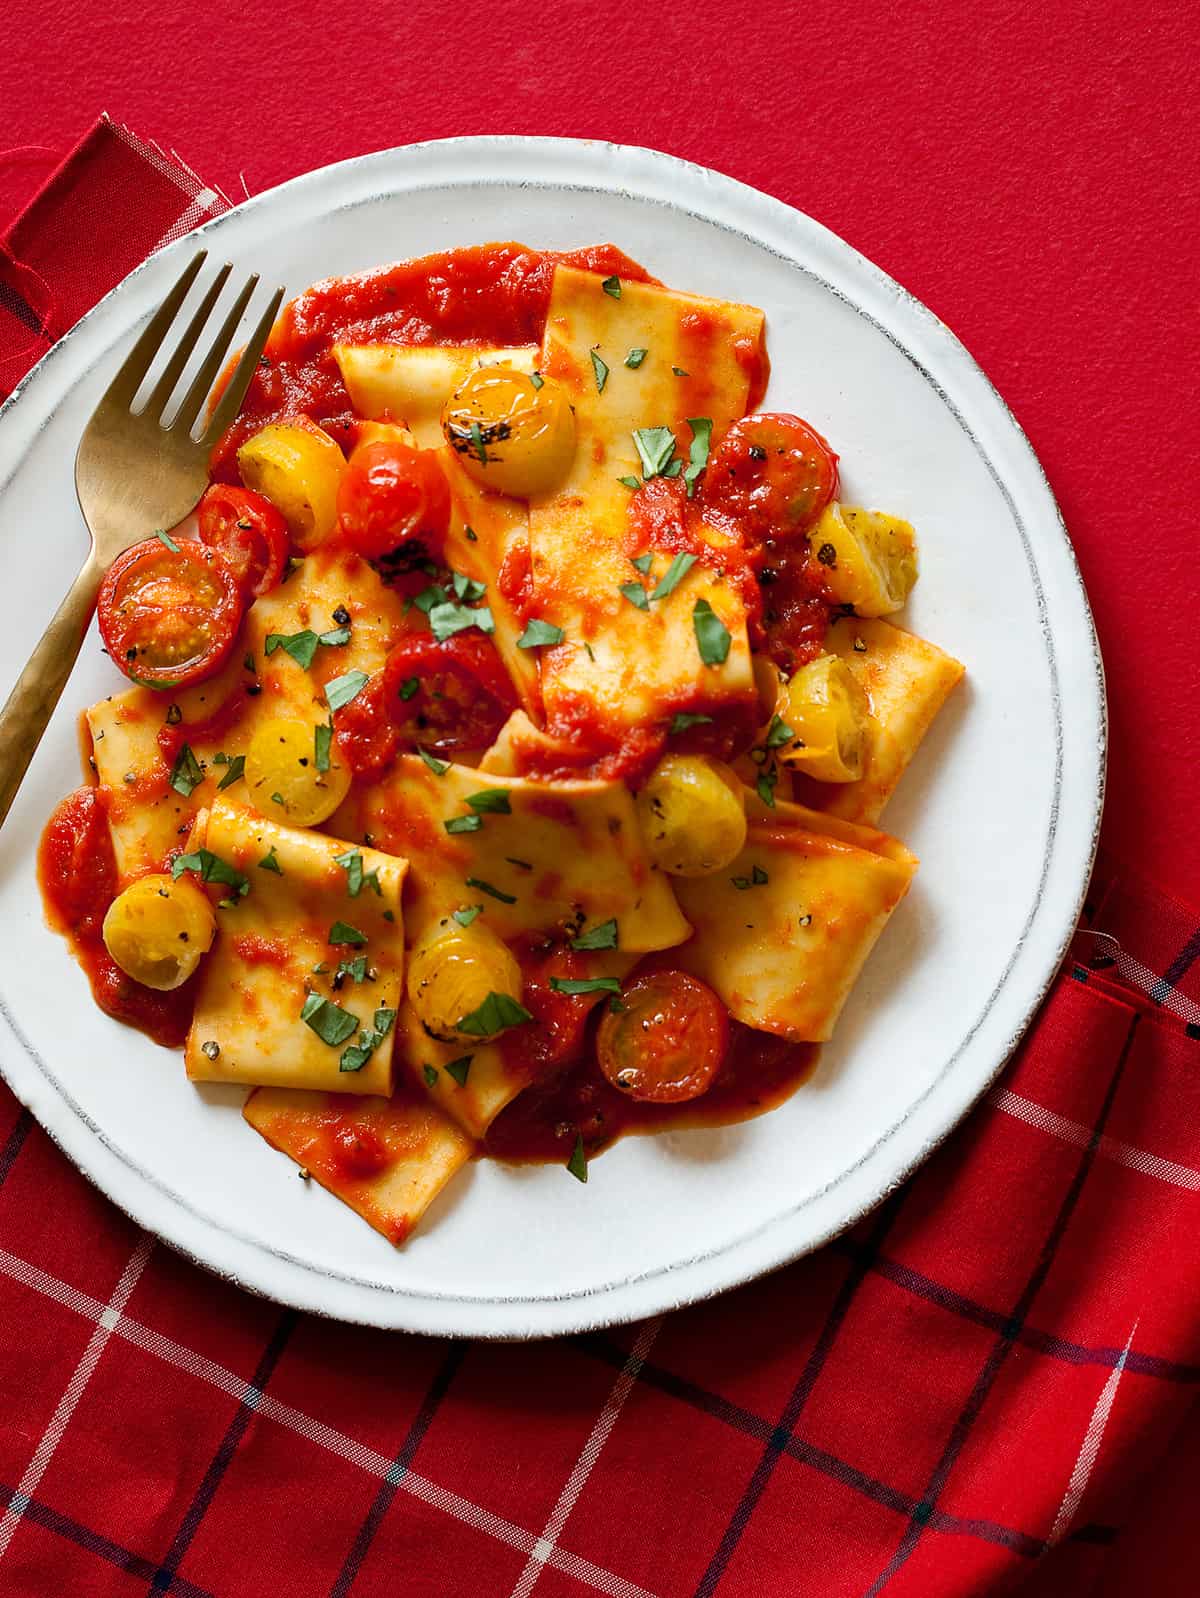 Pappardelle Pasta with a Roasted Cherry Tomato Sauce recipe